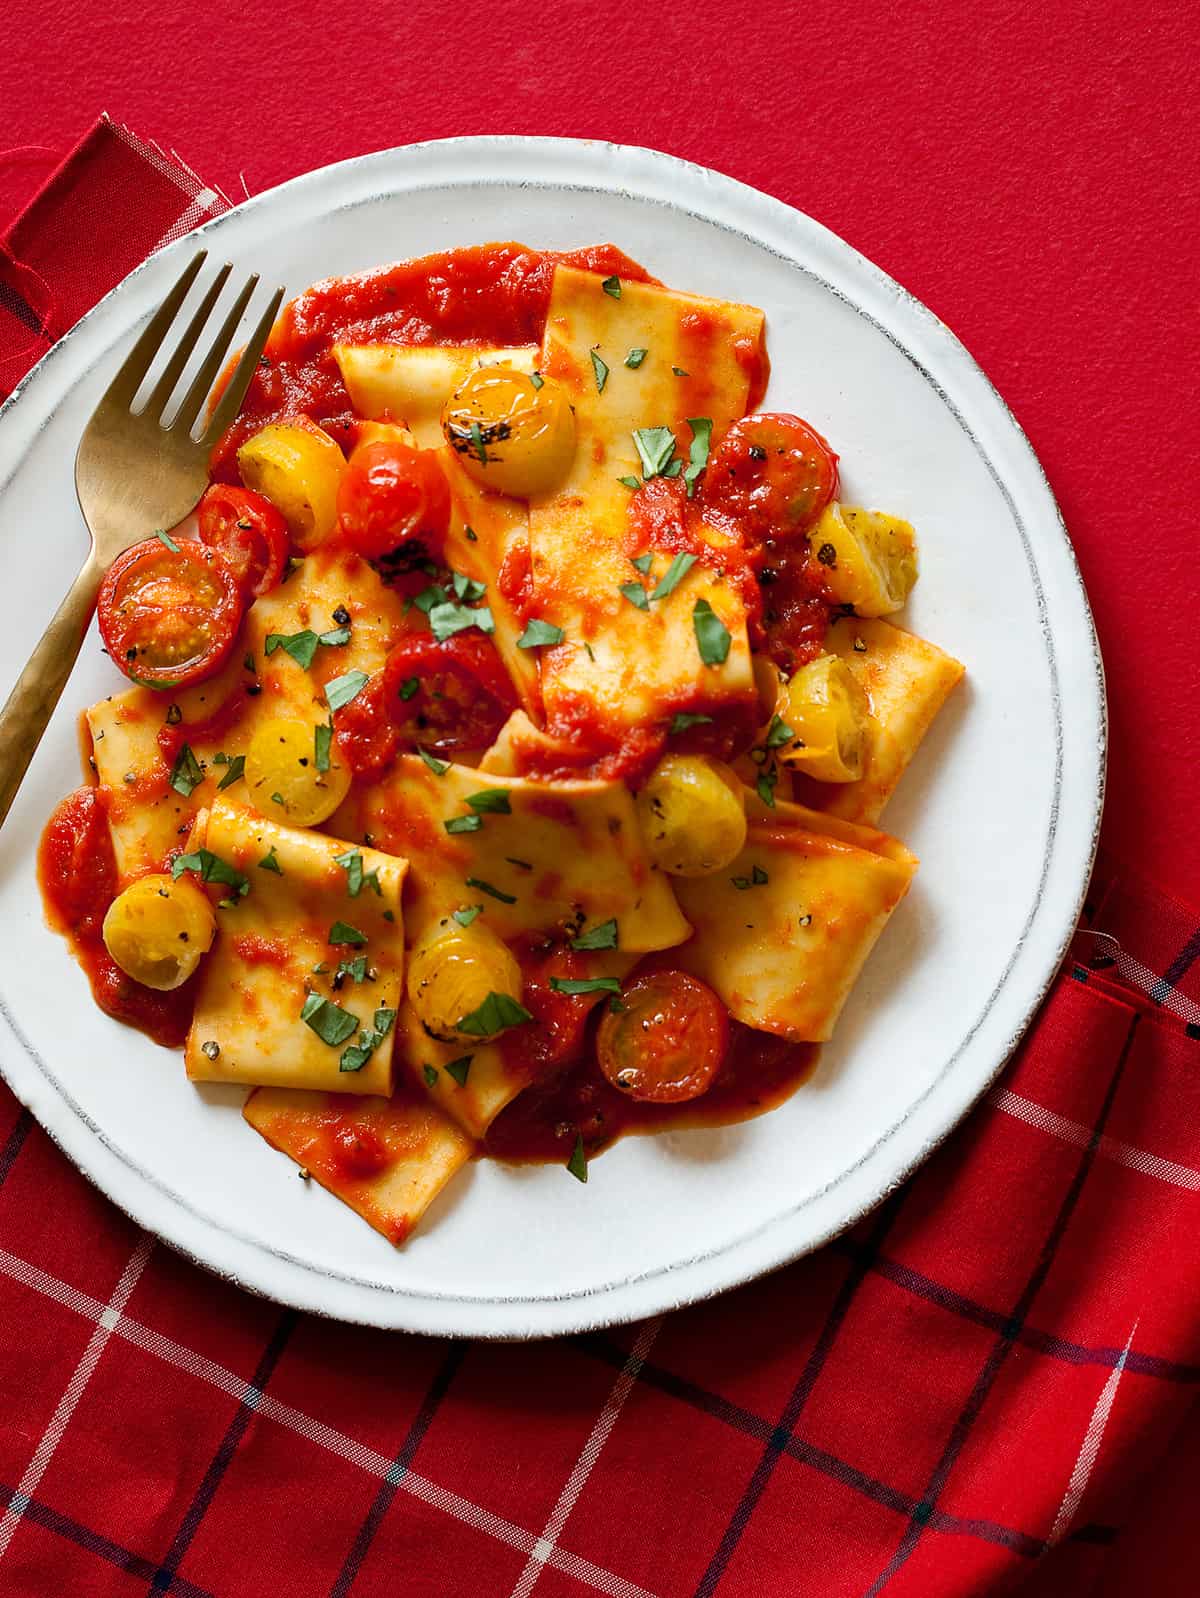 Pappardelle Pasta with a Roasted Cherry Tomato Sauce recipe